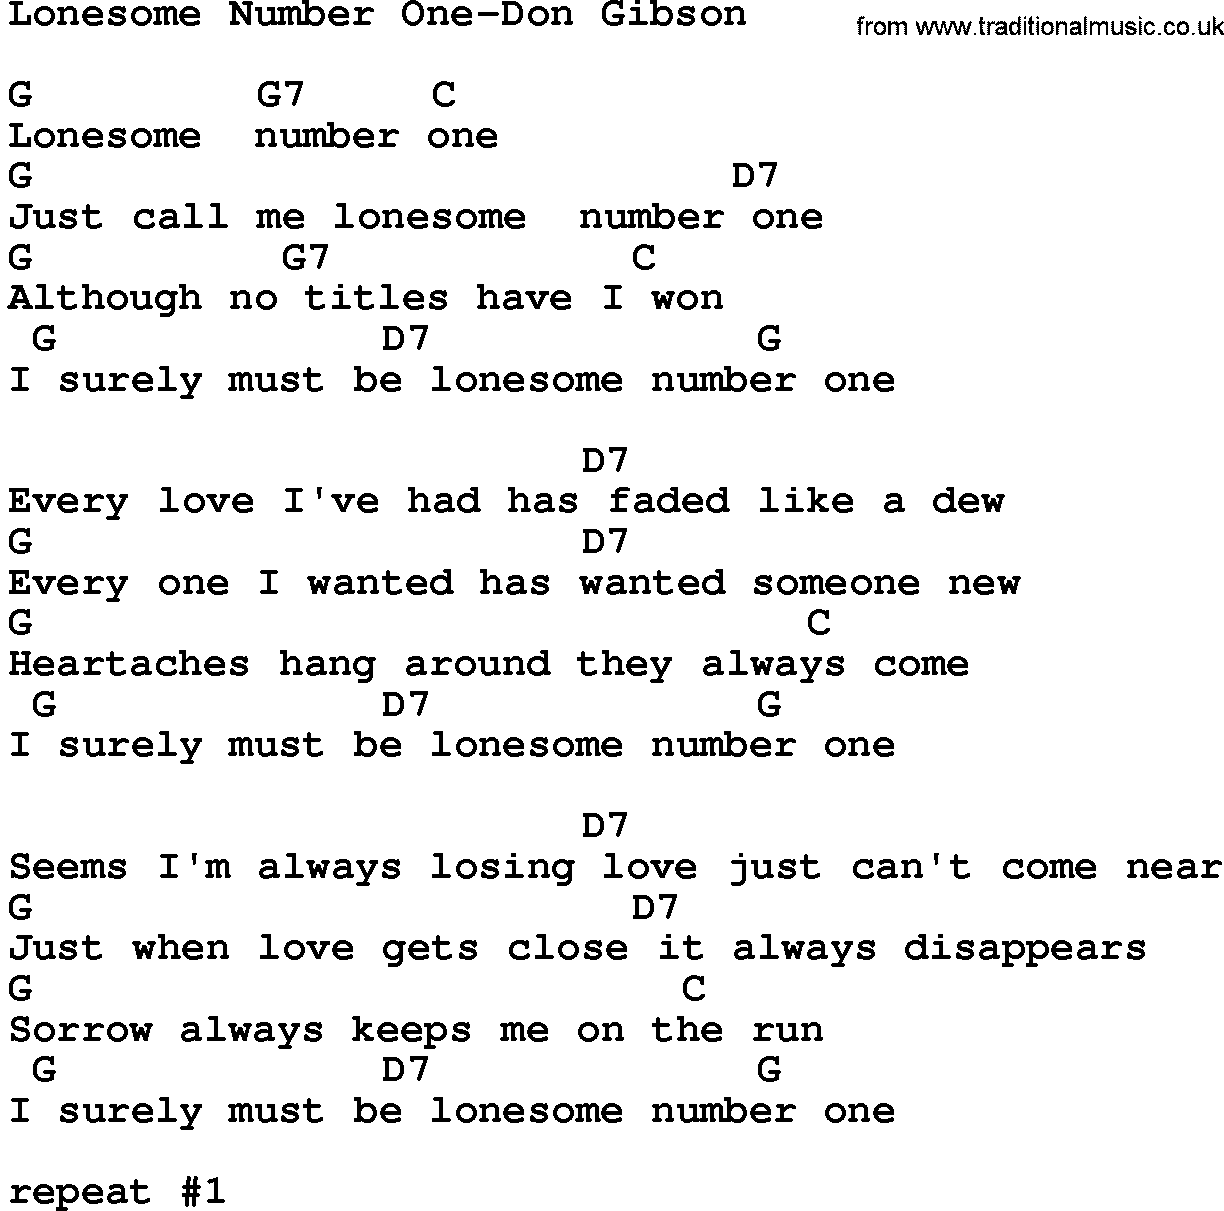 Country music song: Lonesome Number One-Don Gibson lyrics and chords